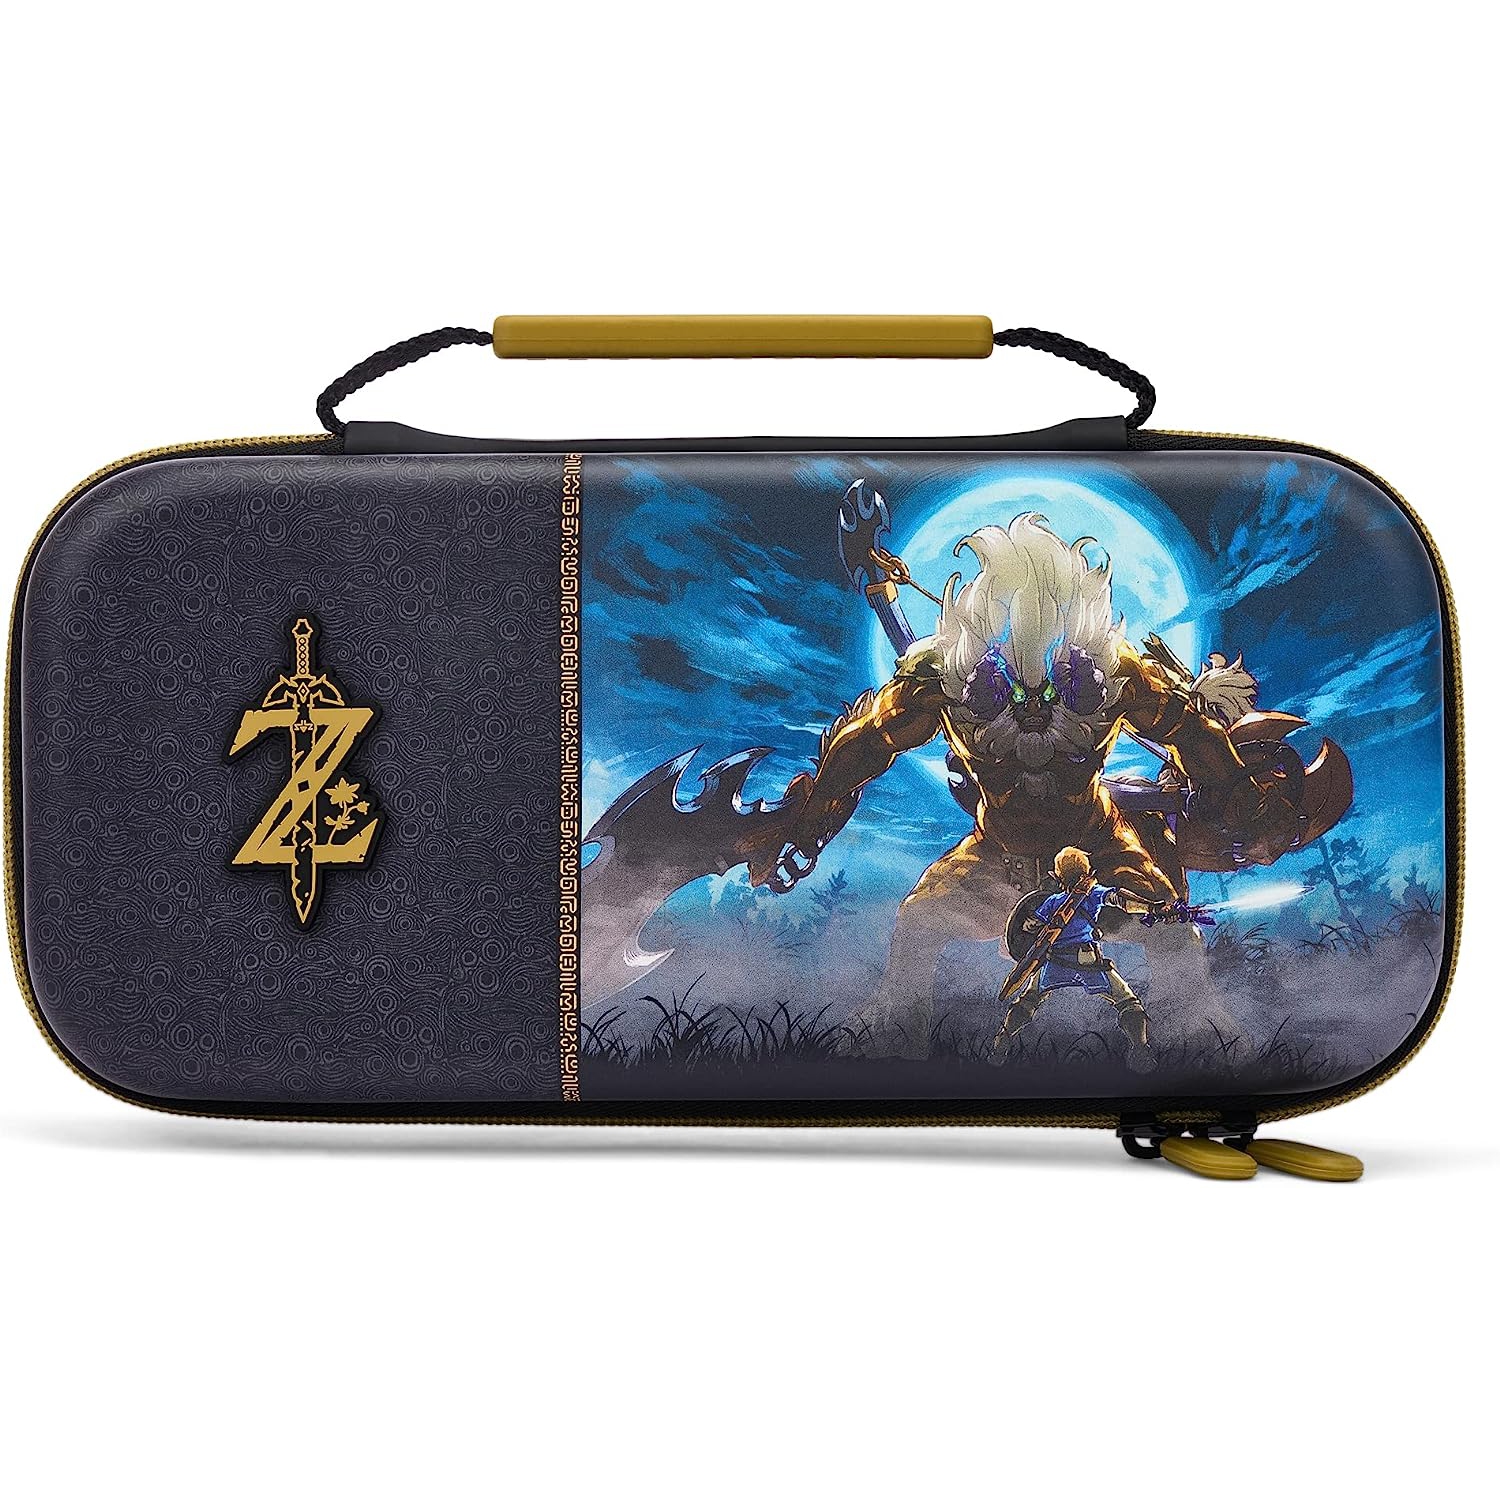 PowerA Protection Case for Nintendo Switch - OLED Model, Nintendo Switch and Nintendo Switch Lite - Link vs. Lynel